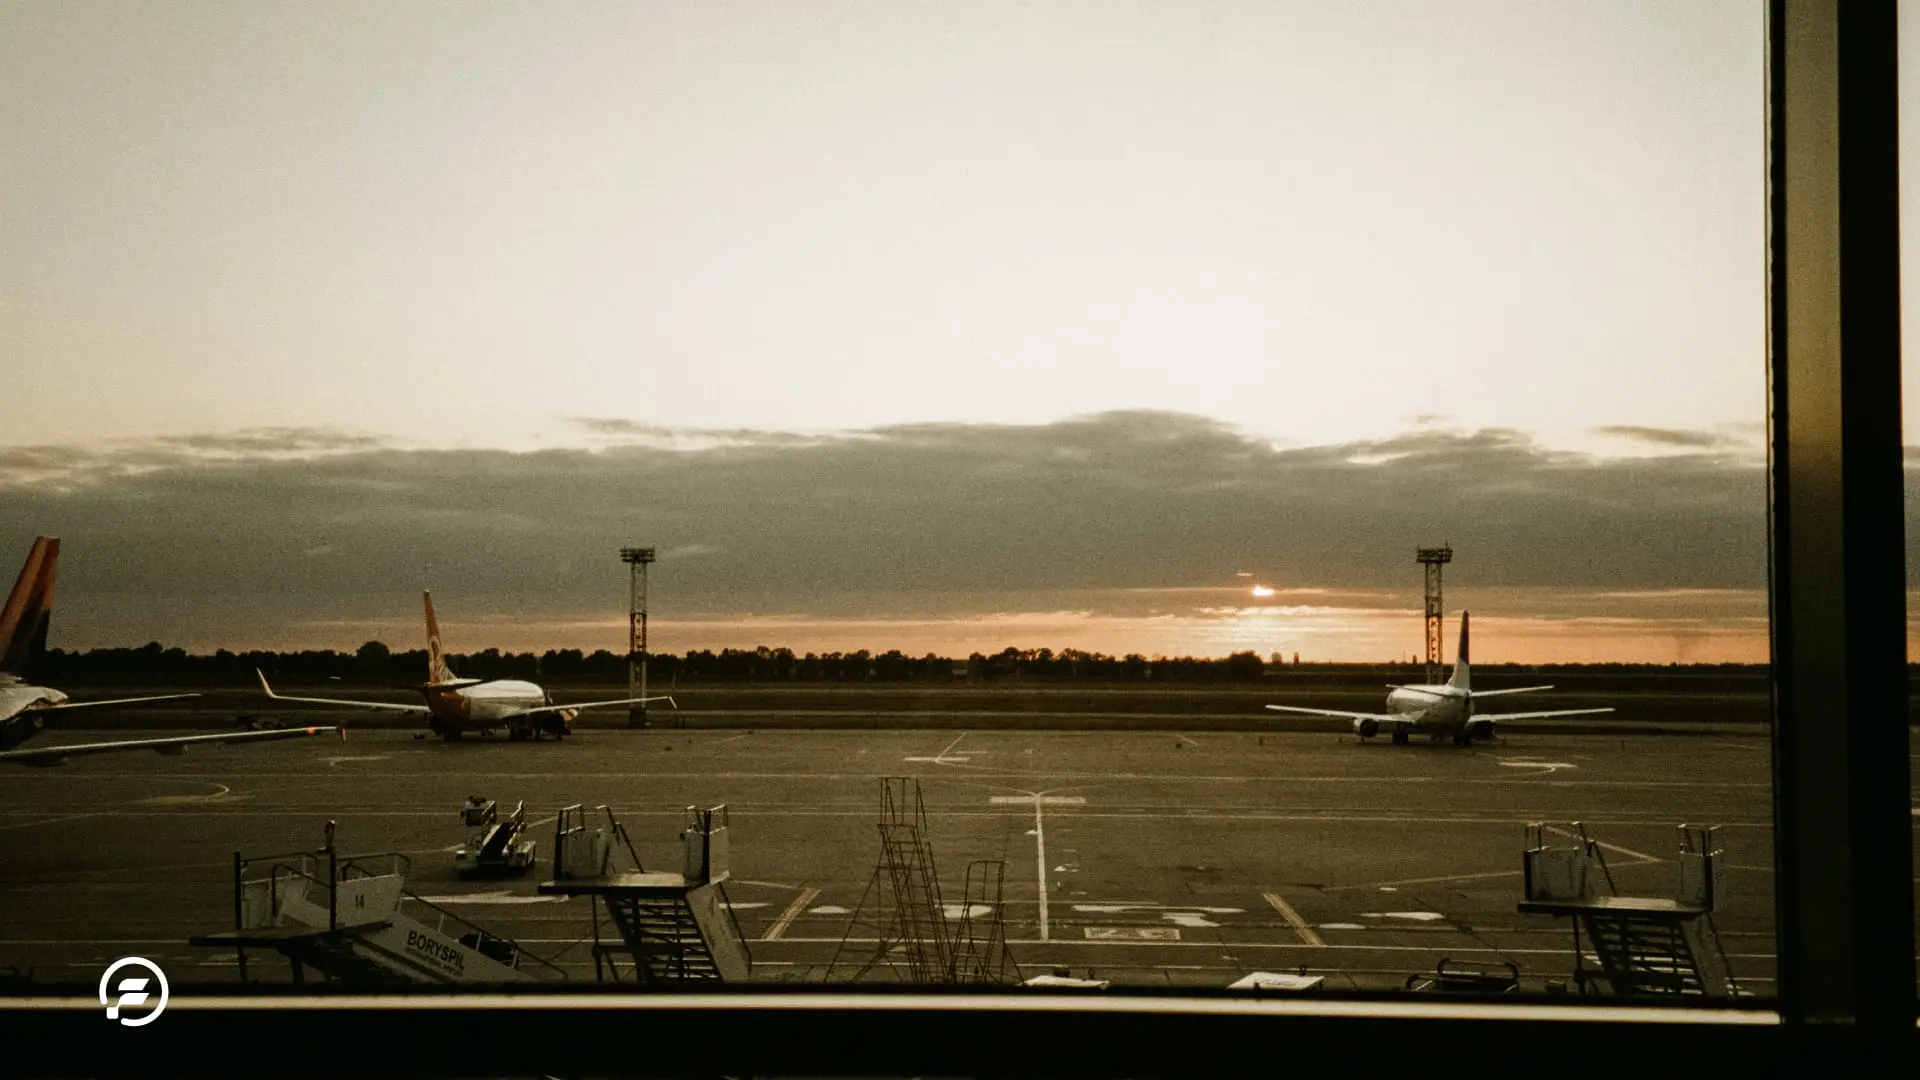 A beautiful sunset over the airport tarmac.